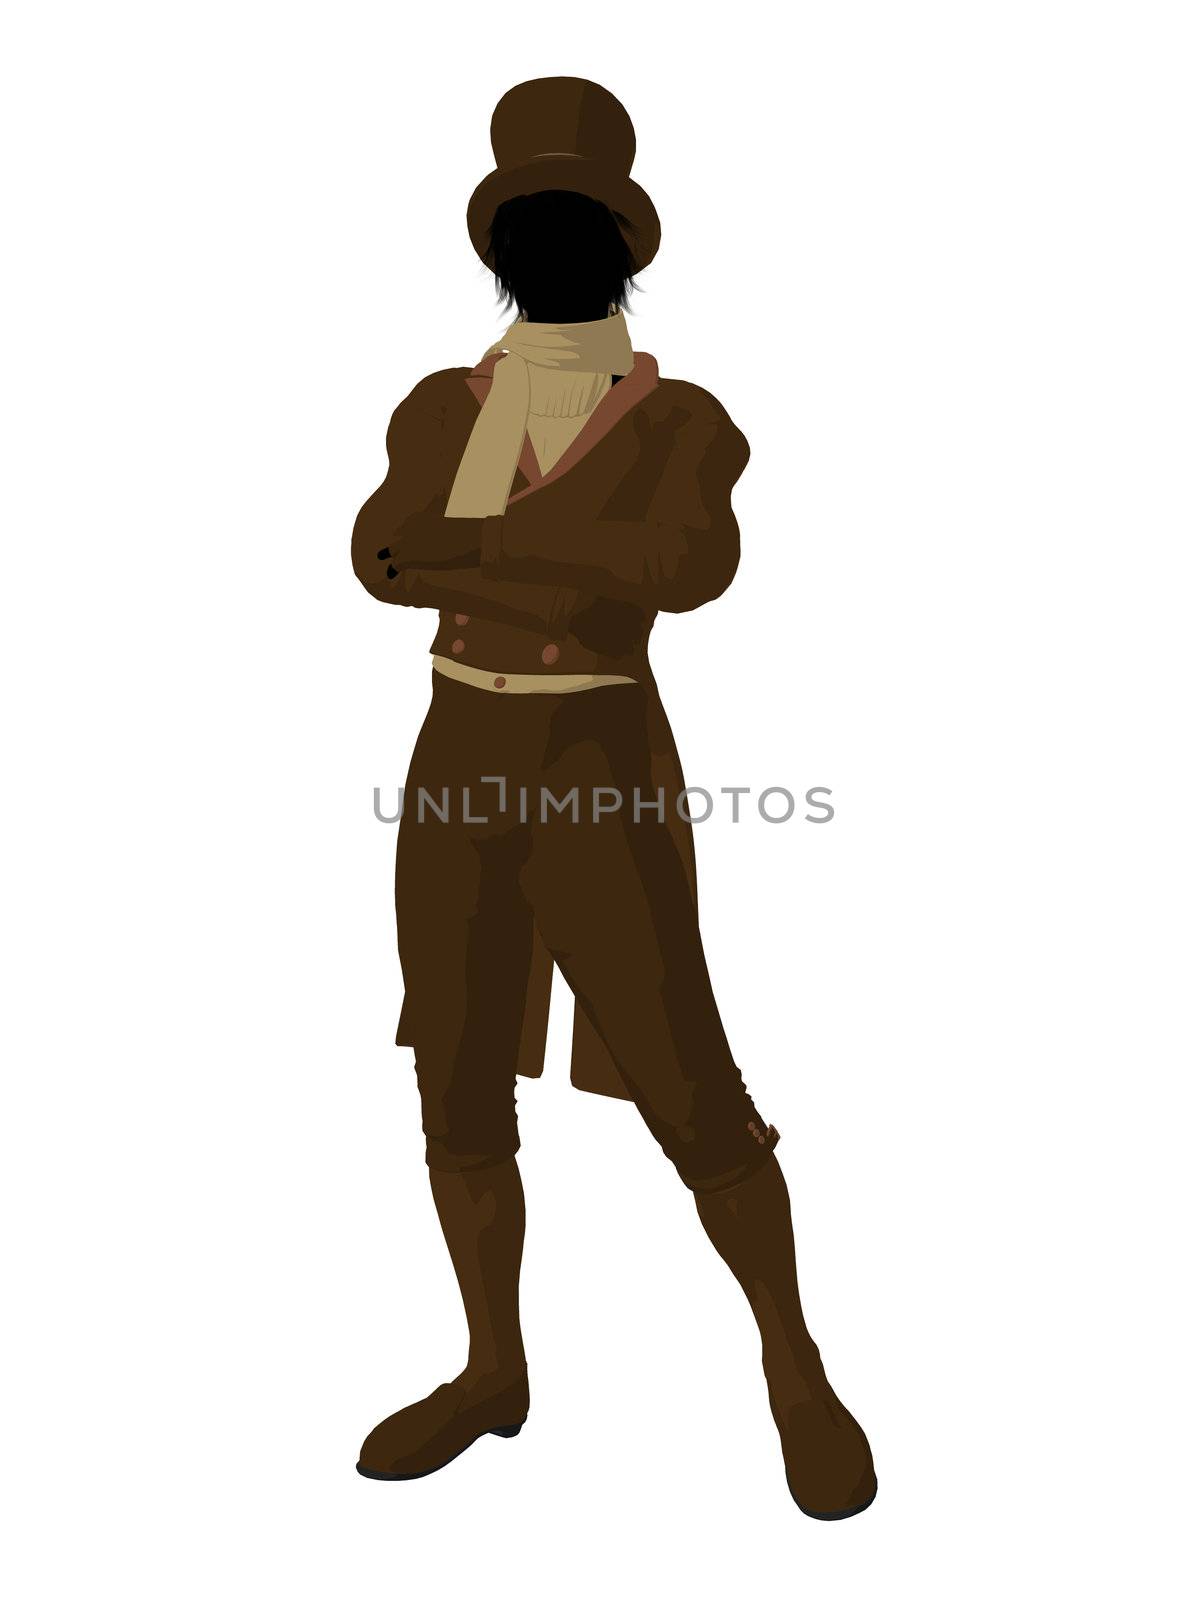 Victorian man art illustration silhouette on a white background